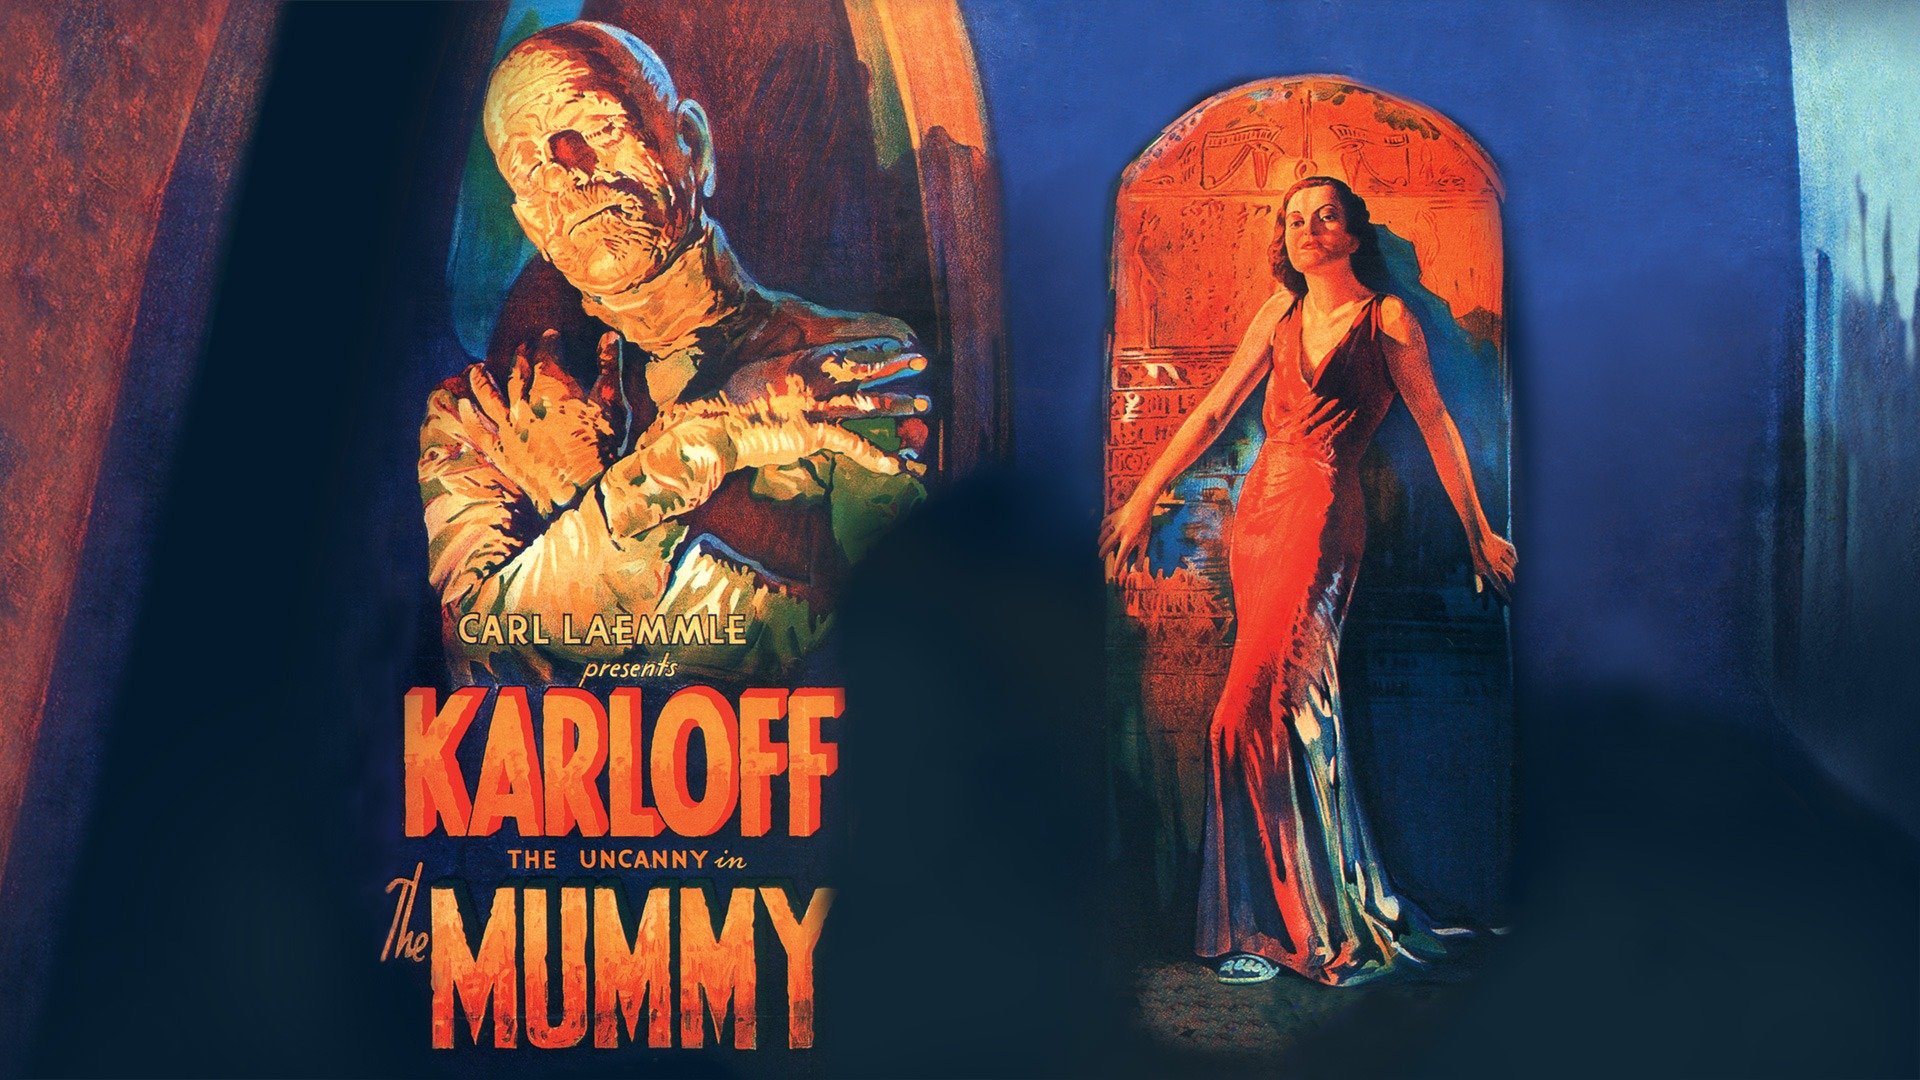 the mummy poster 1932